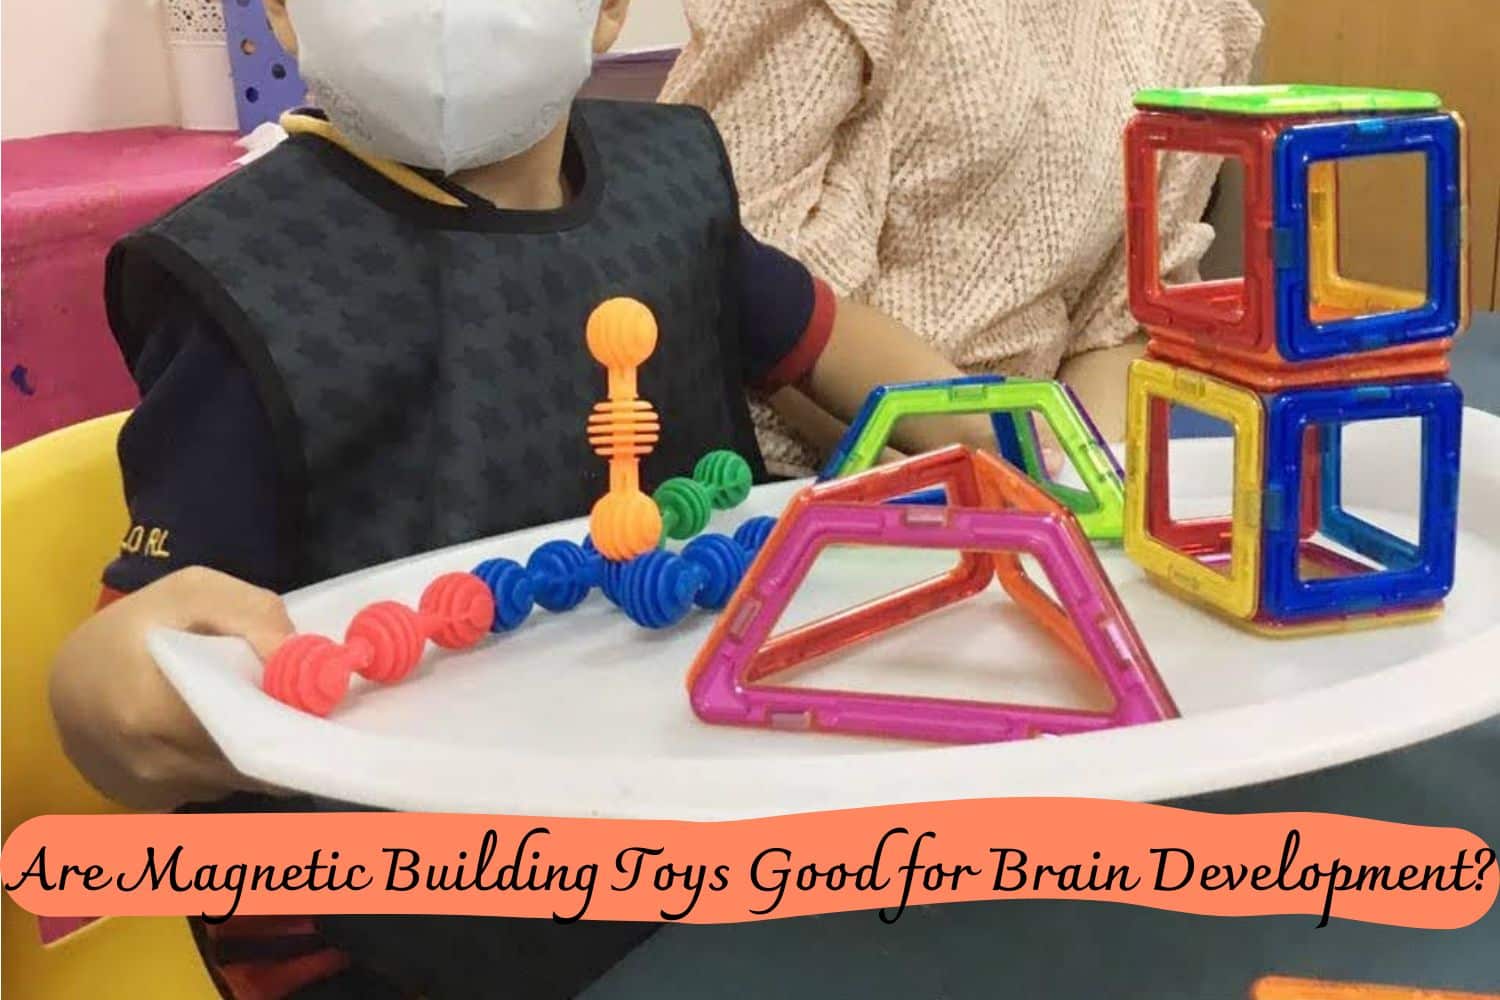 Are Magnetic Building Toys Good for Brain Development?